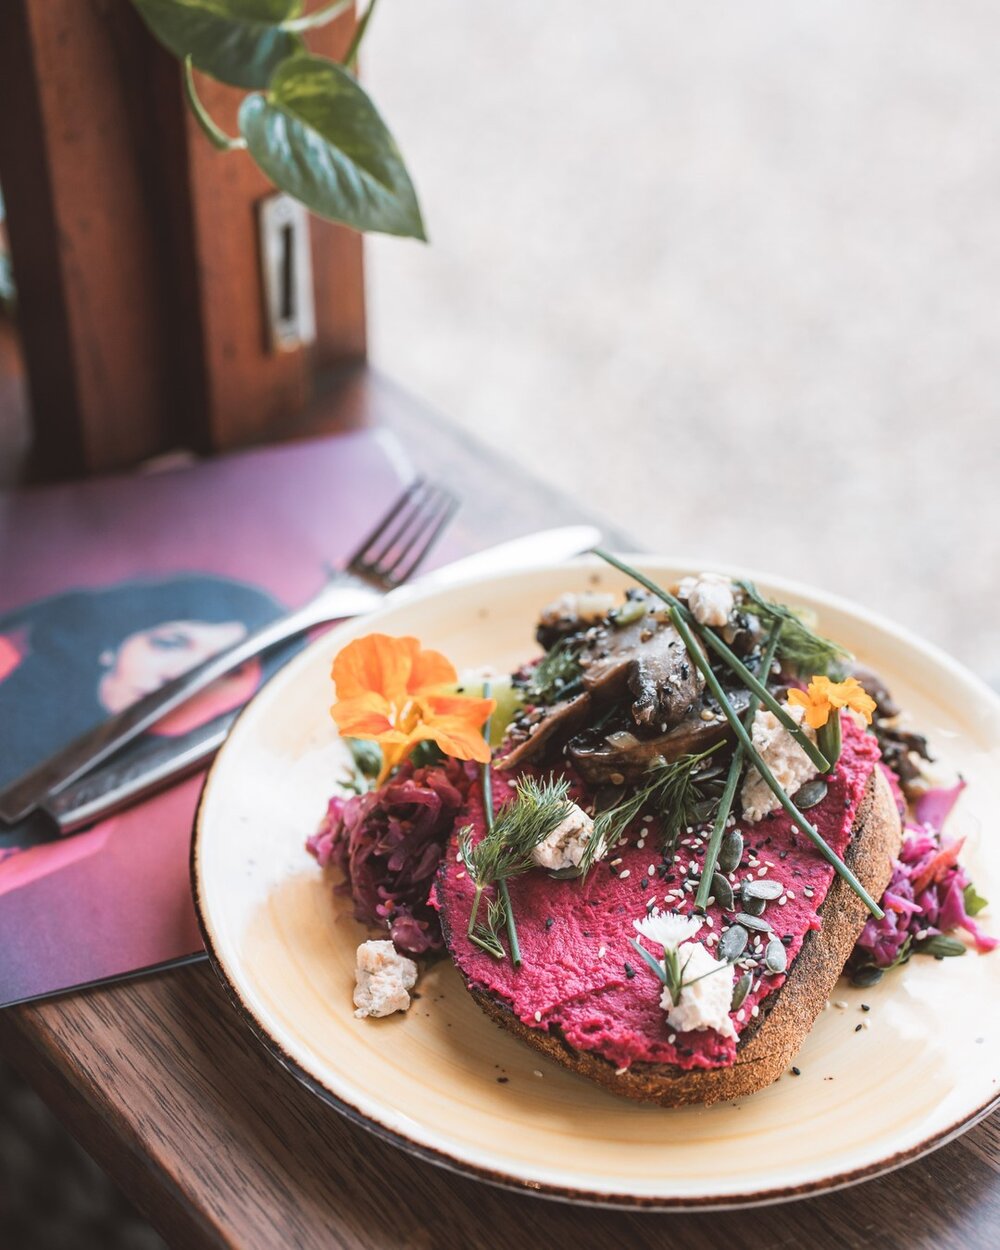  Niche &amp; Co Gold Coast. This guide to the best cafes in Gold Coast Australia includes the best breakfast spots in Gold Coast and the best vegan cafes in Gold Coast. Find the best cafes in Burleigh Head, Palm Beach, and more of the best places to 